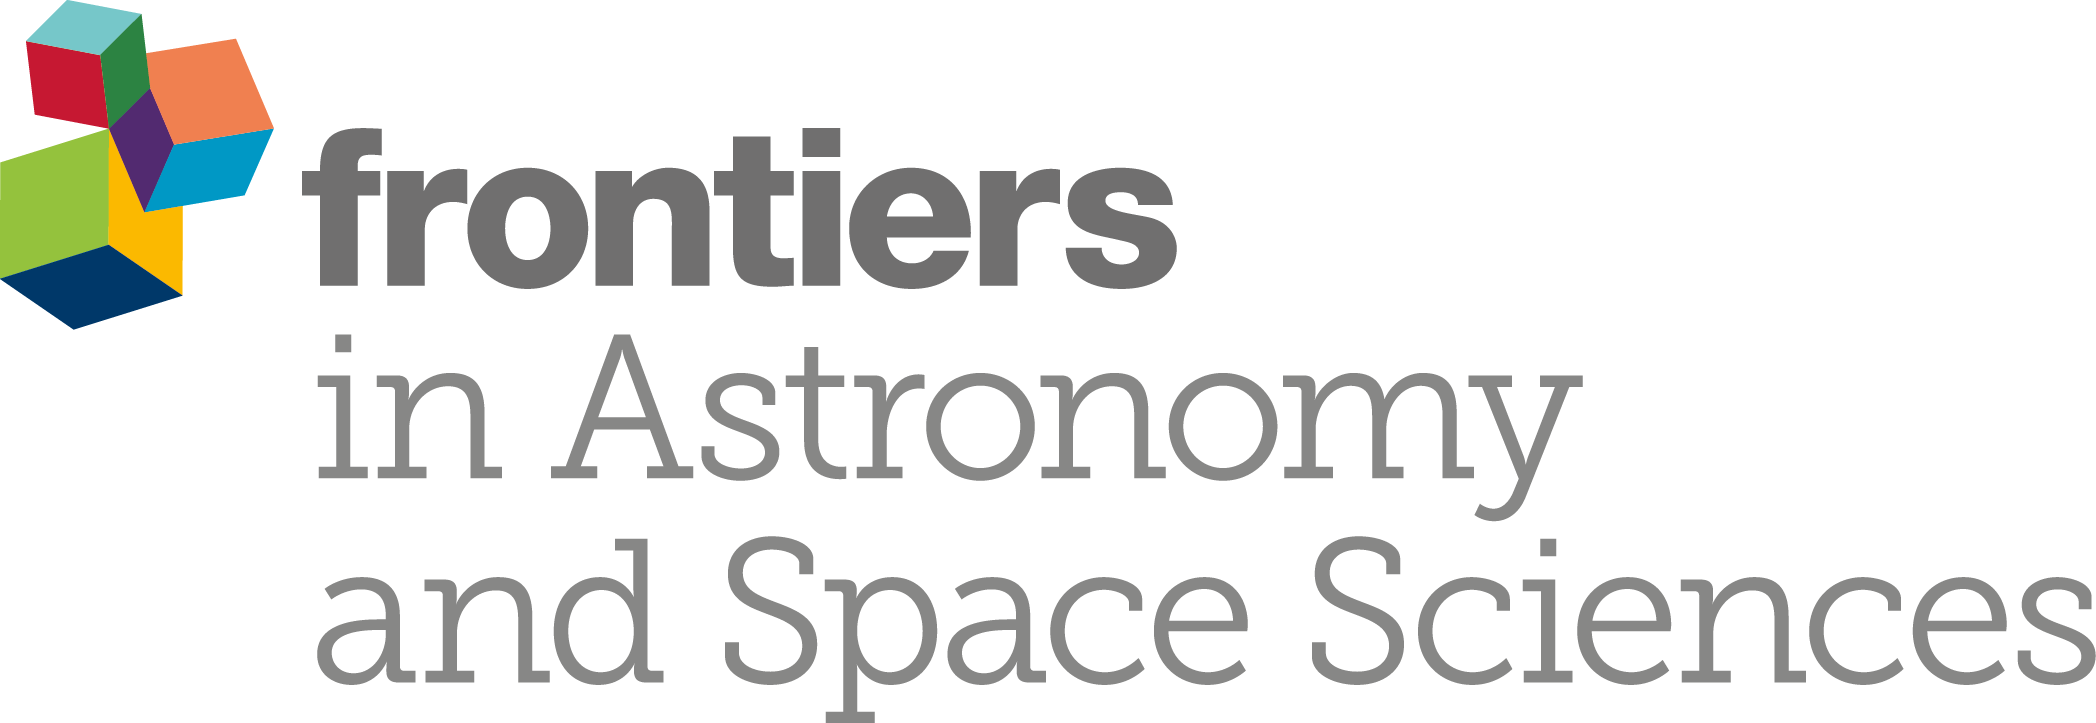 Frontiers in Astronomy and Space Sciences logo